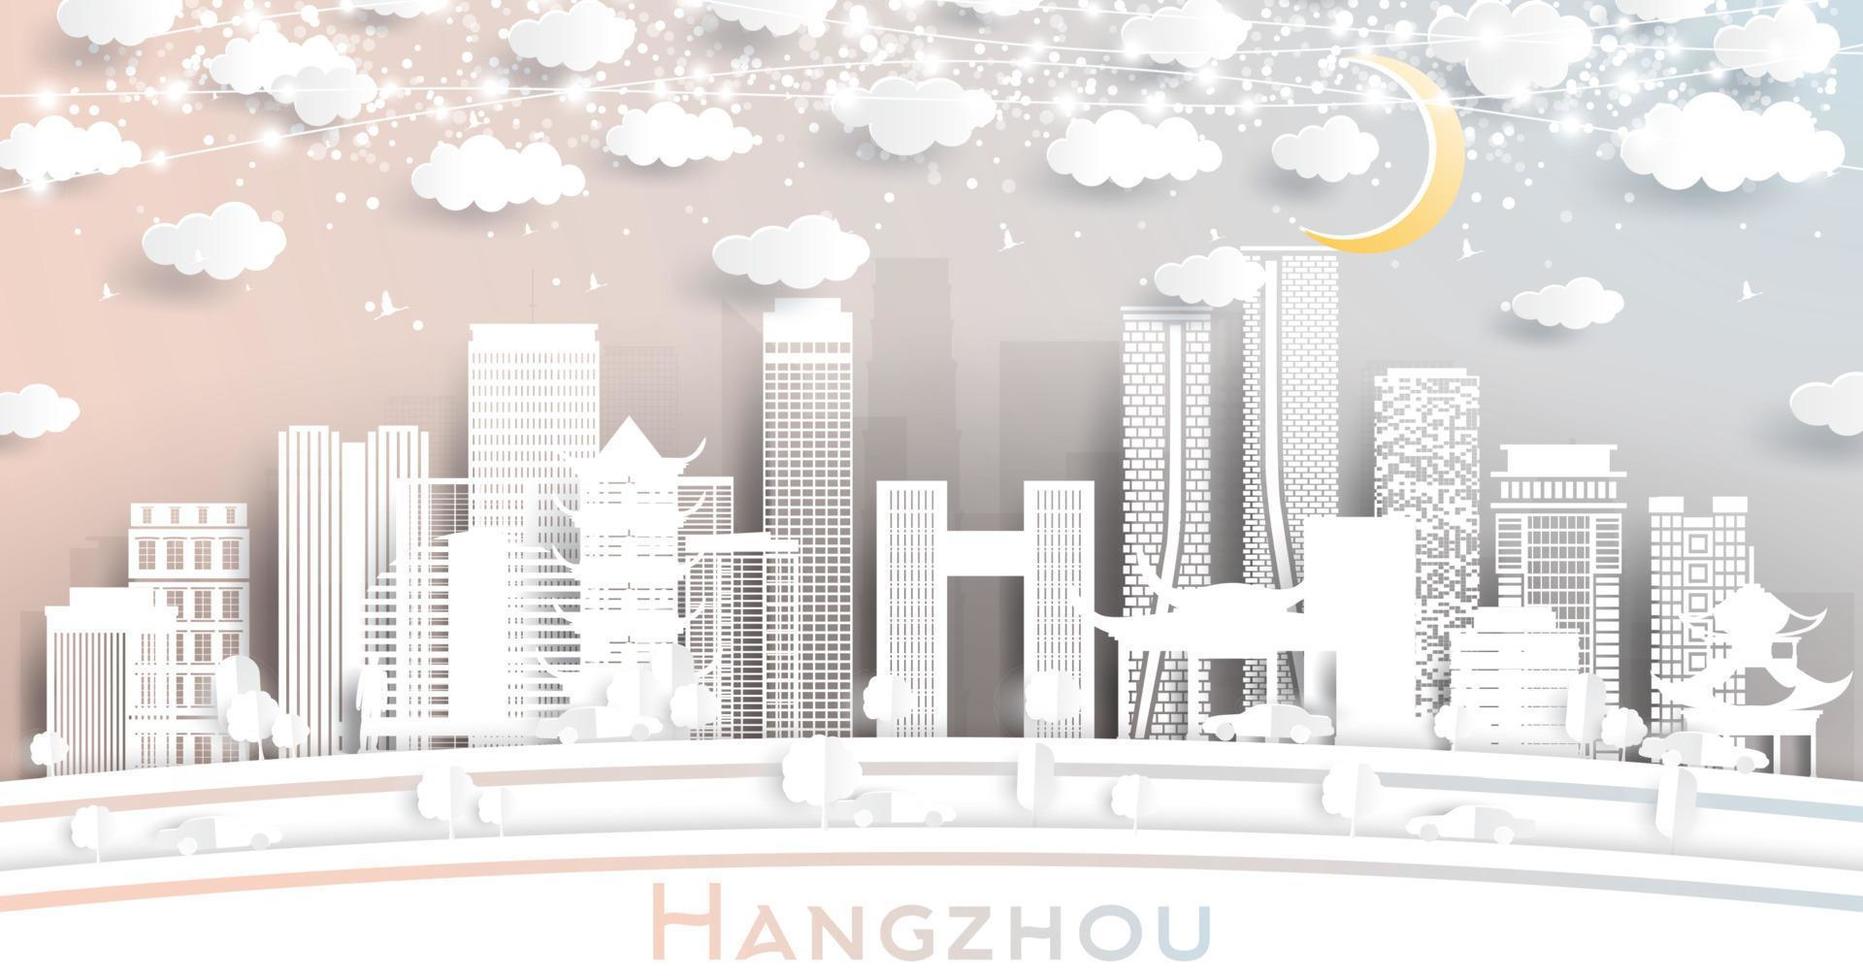 Hangzhou China City Skyline in Paper Cut Style with White Buildings, Moon and Neon Garland. vector